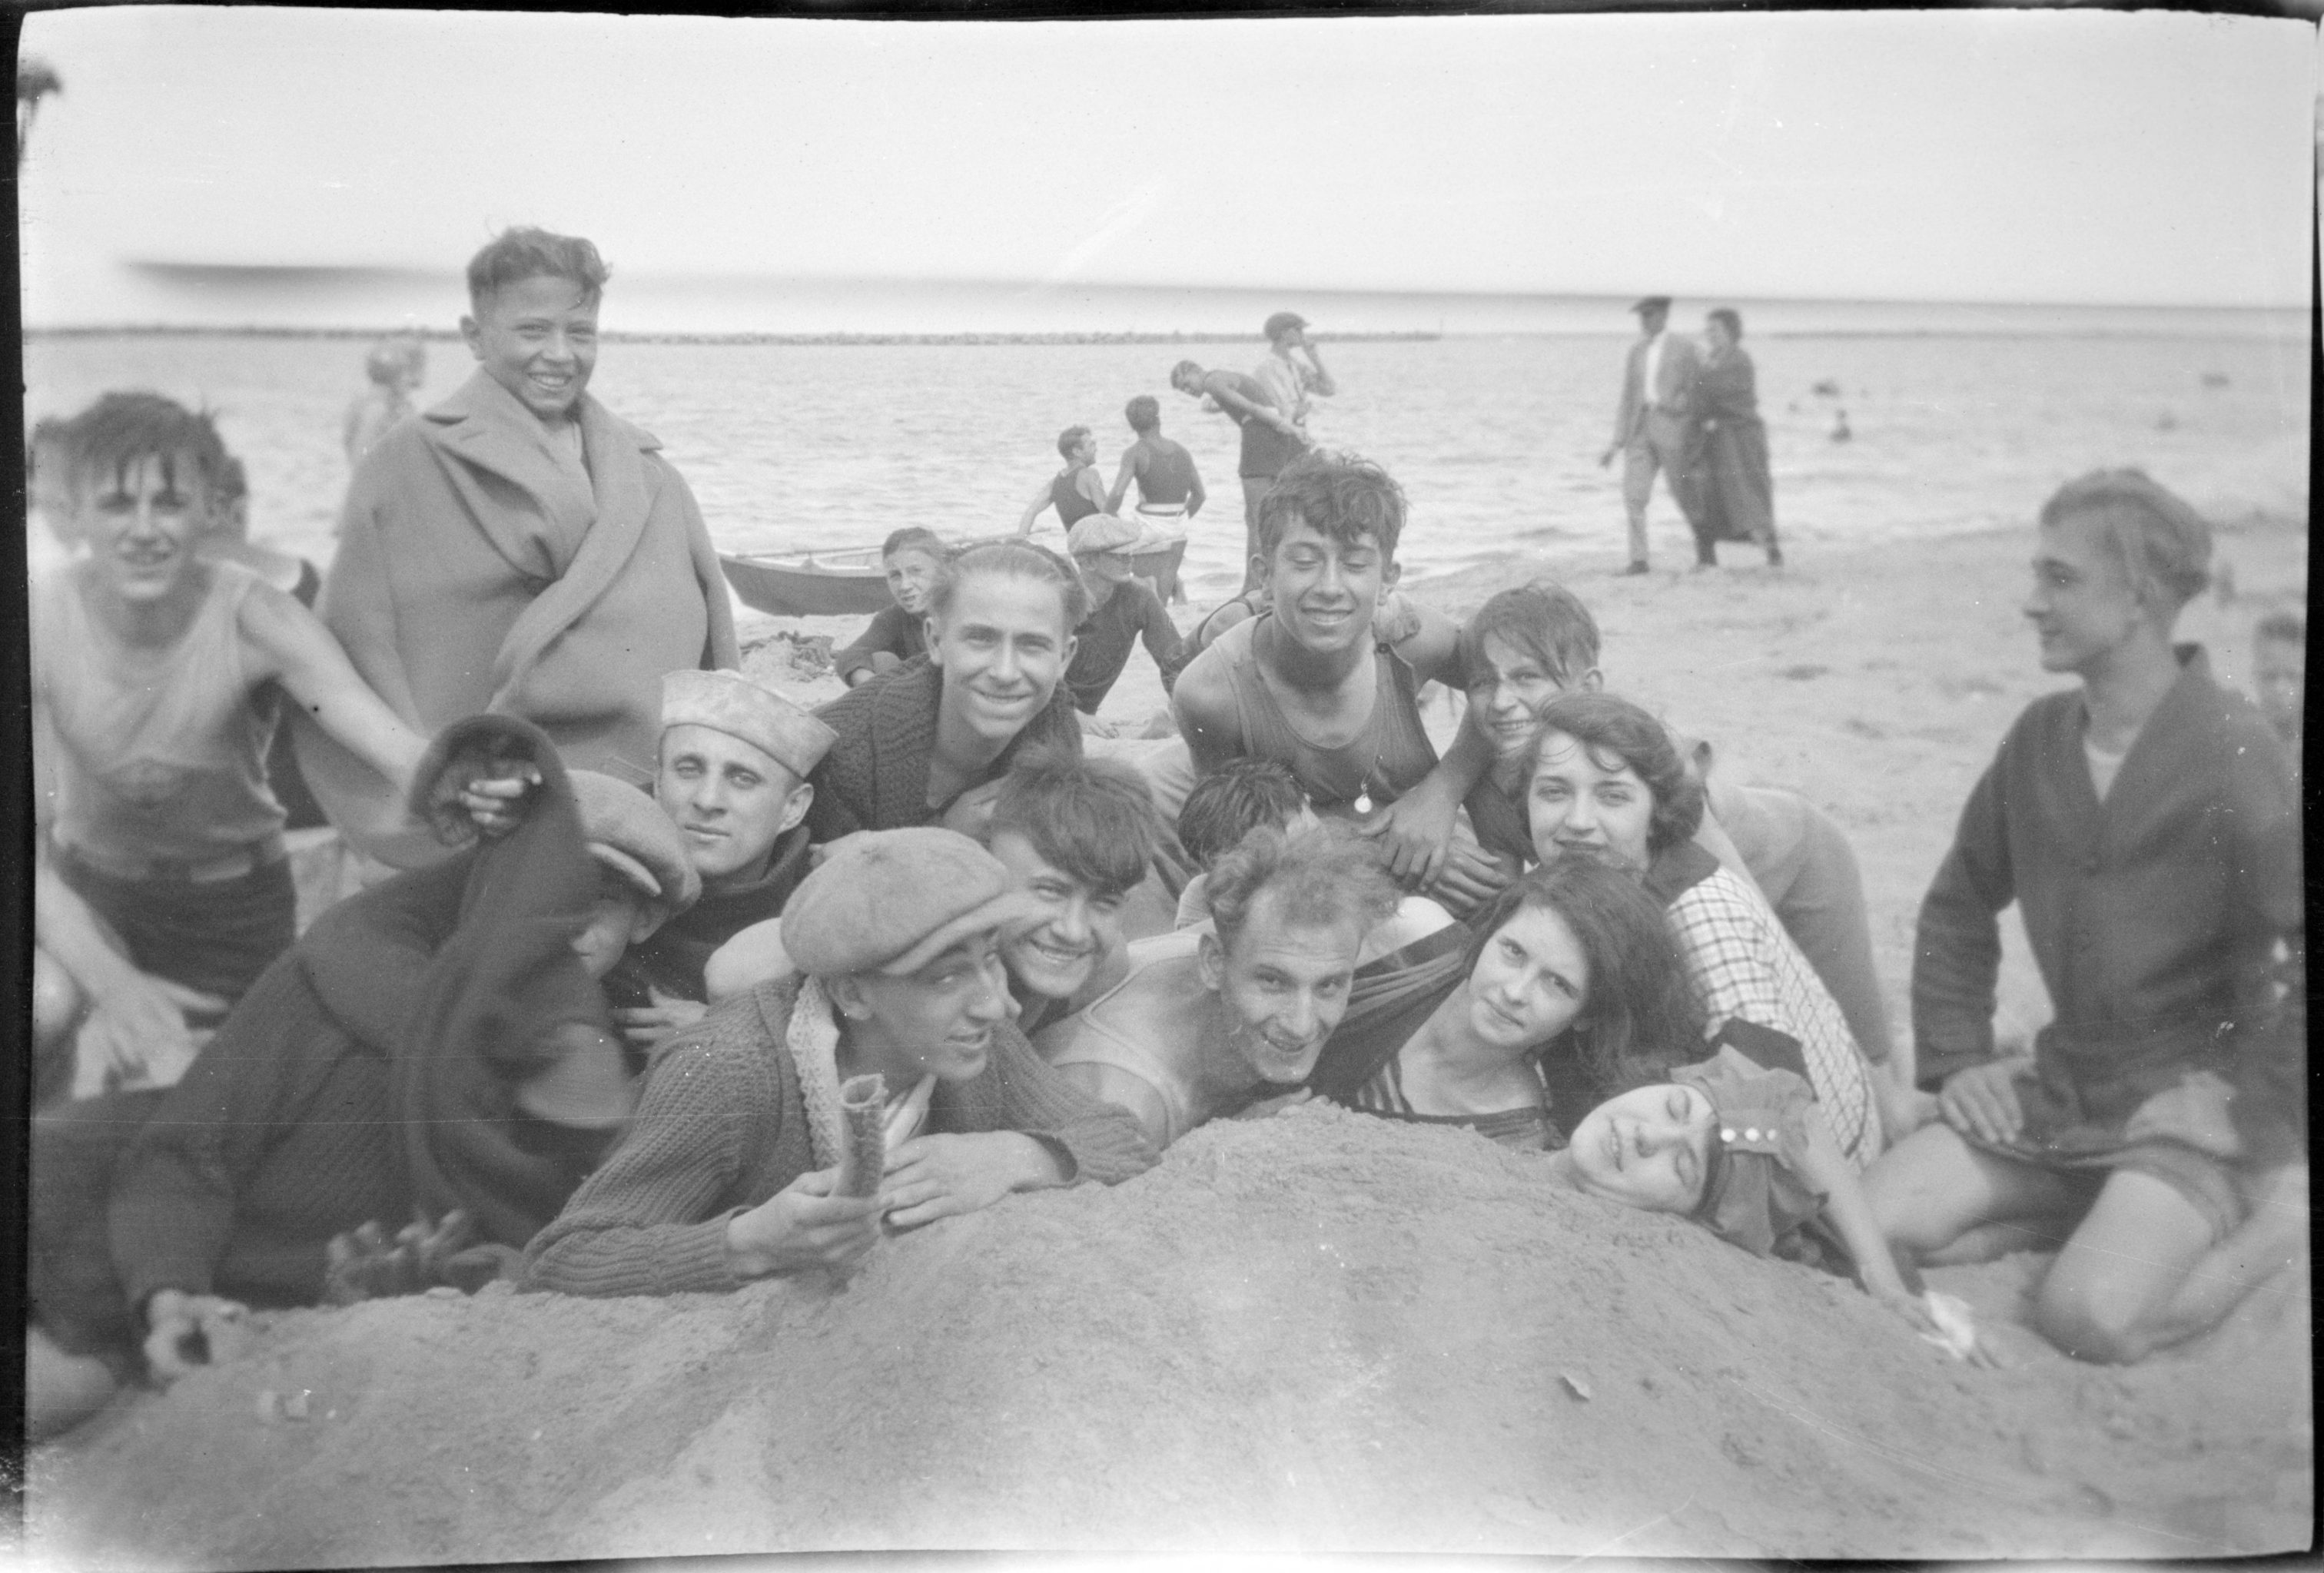 A group of young men and women enjoy a day at the beach during the first half of the twentieth century. 